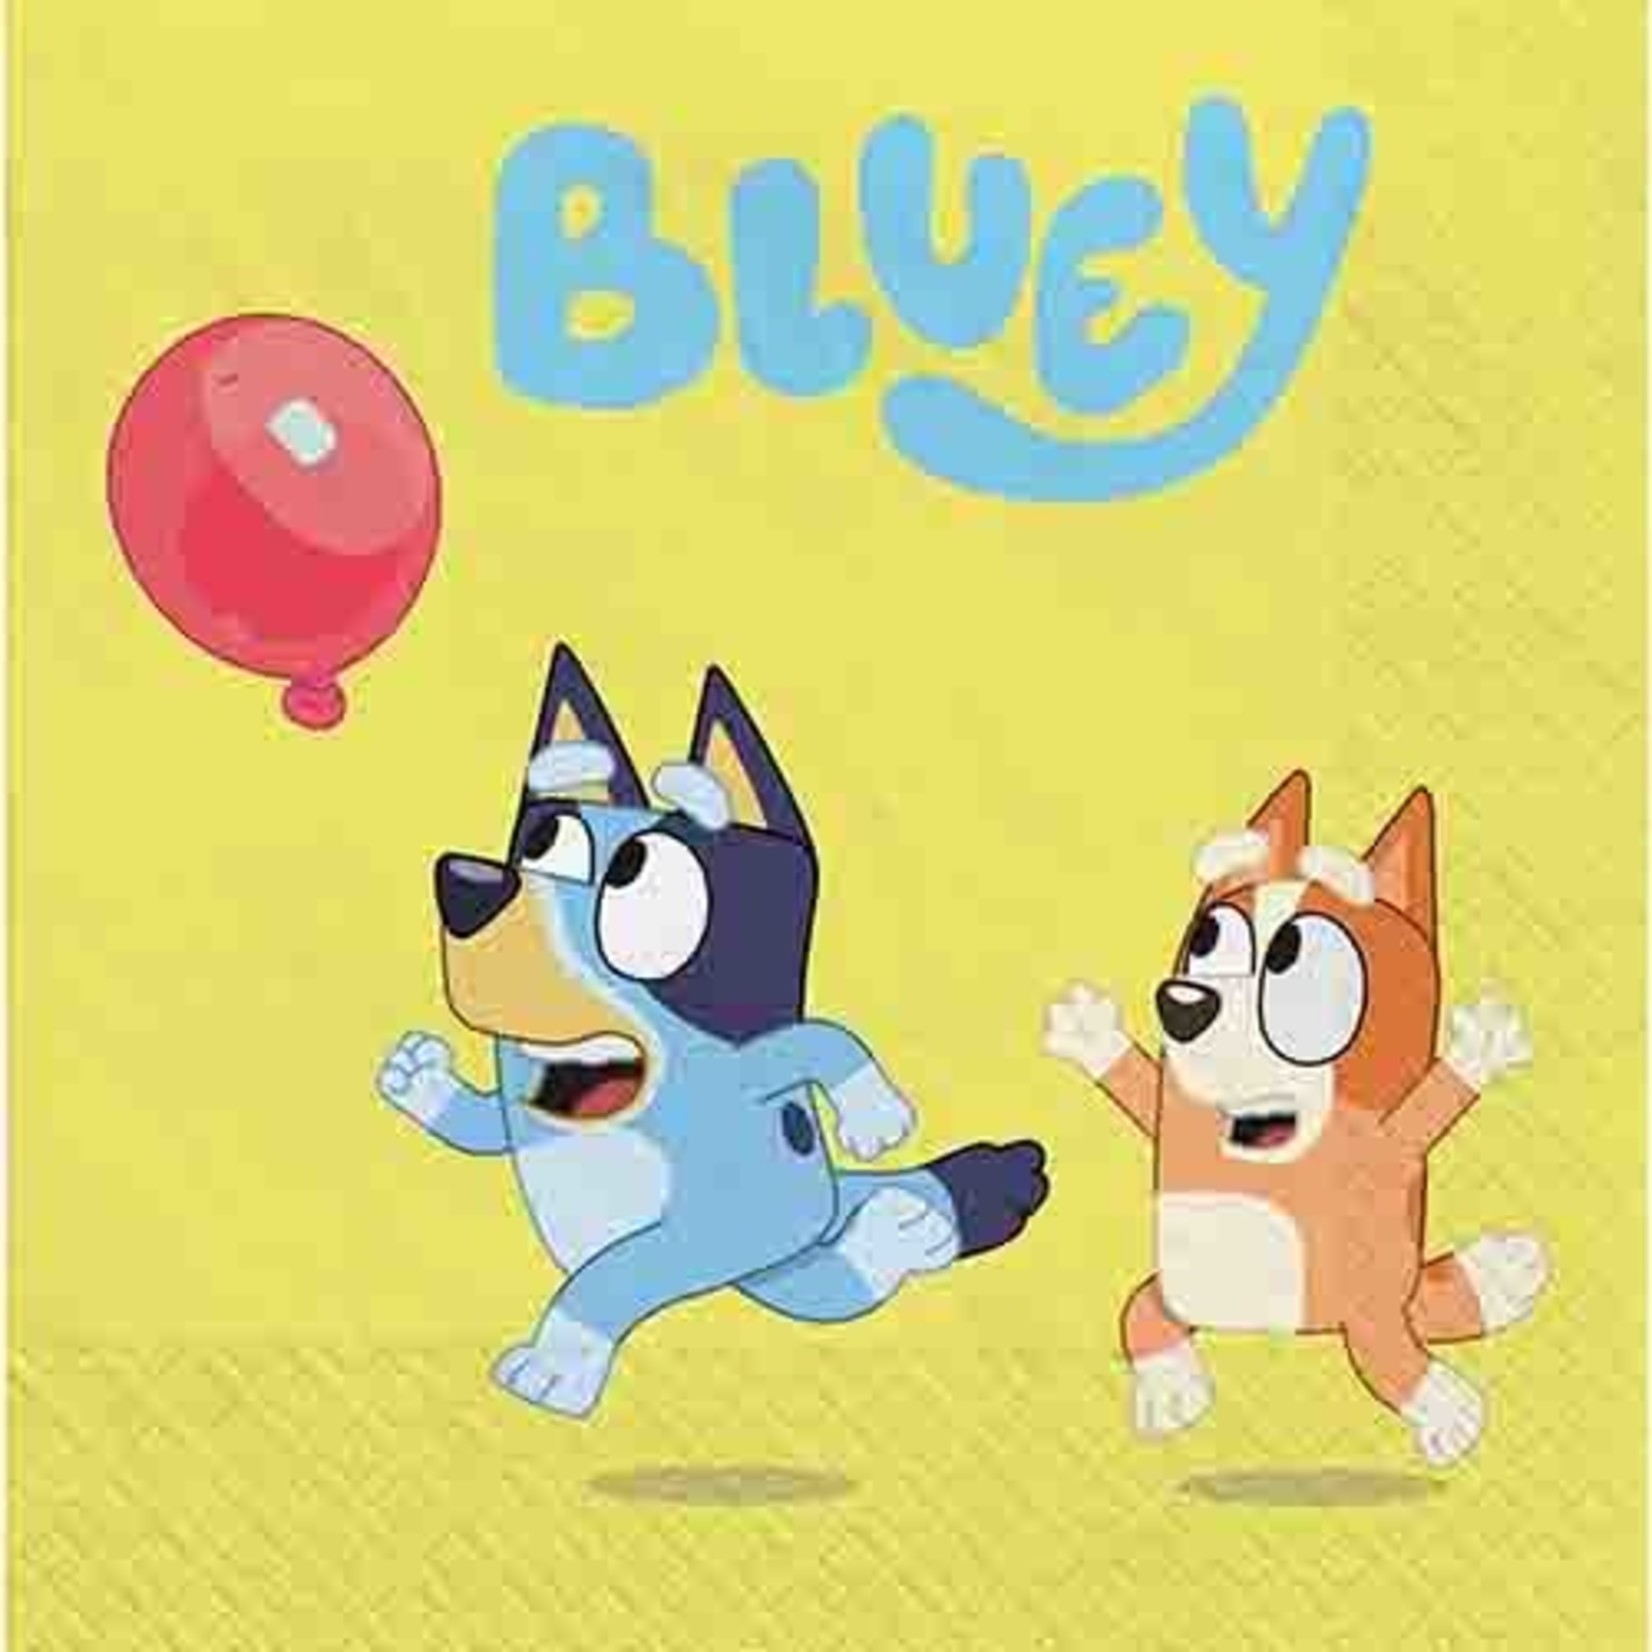 Amscan Bluey Party Supplies Pack Serves 16: Bluey Birthday Party Supplies; Bluey 7 inch Dessert Plates & Beverage Napkins with Birthday Candles (